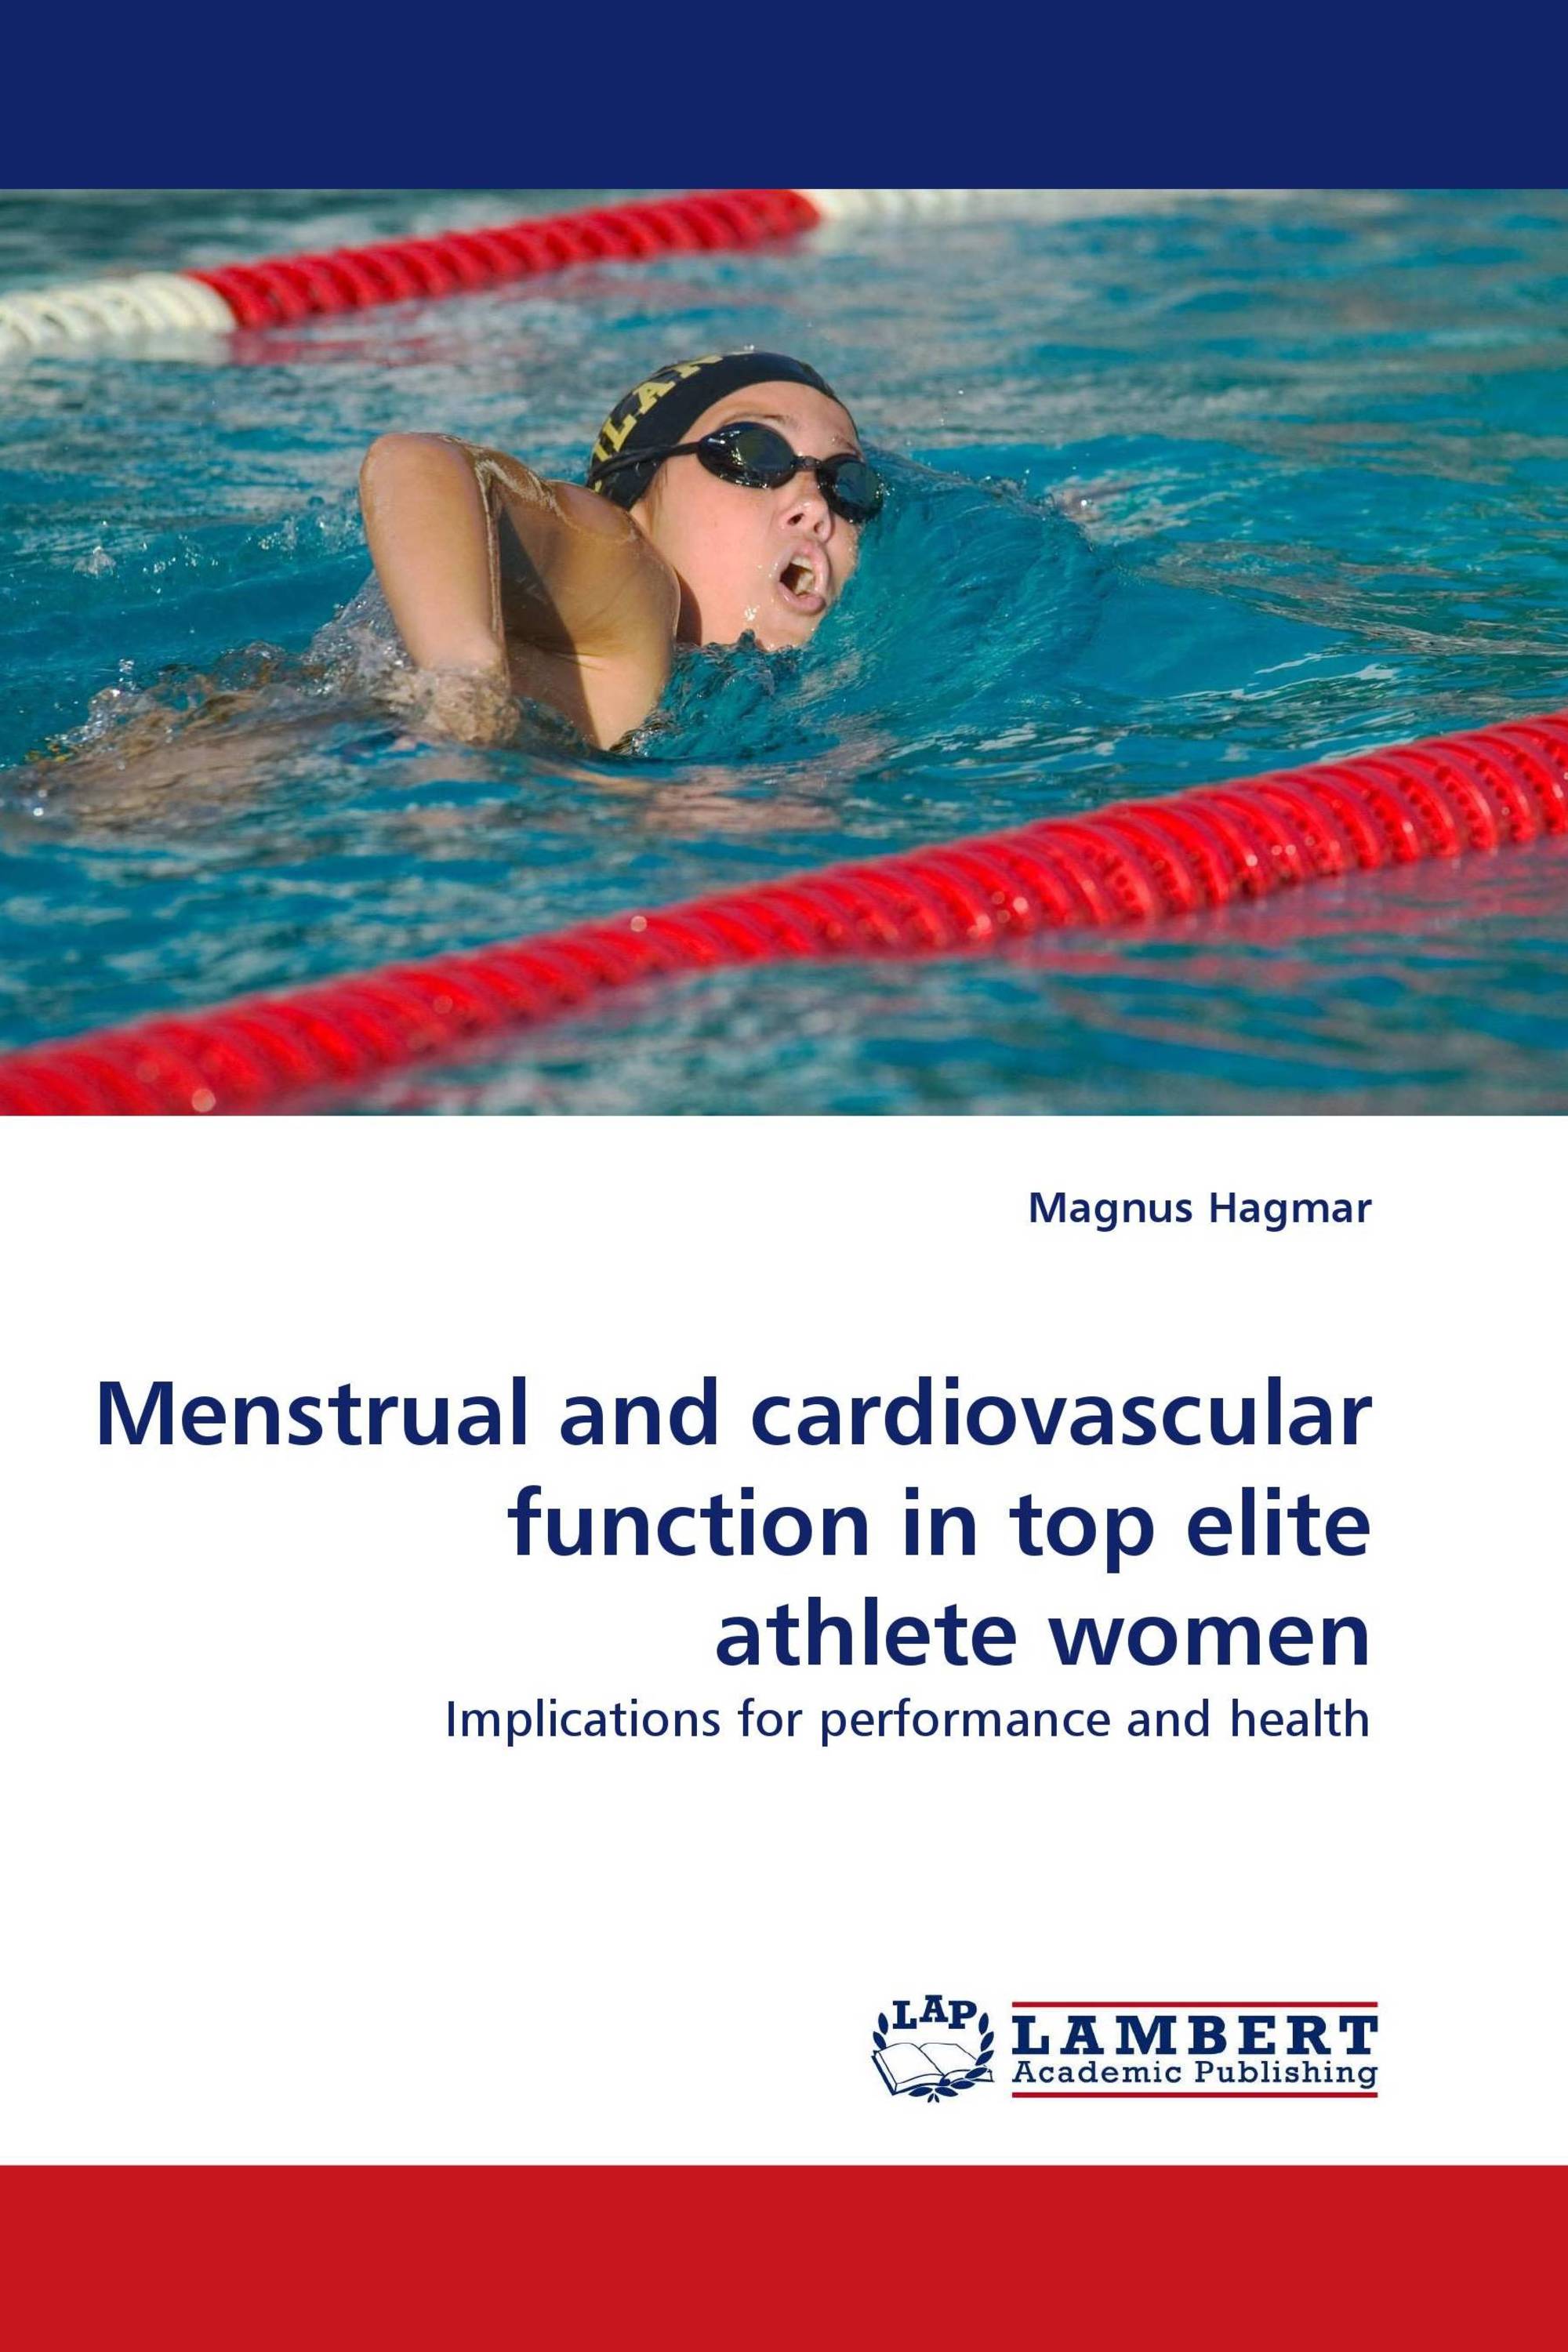 Menstrual and cardiovascular function in top elite athlete women